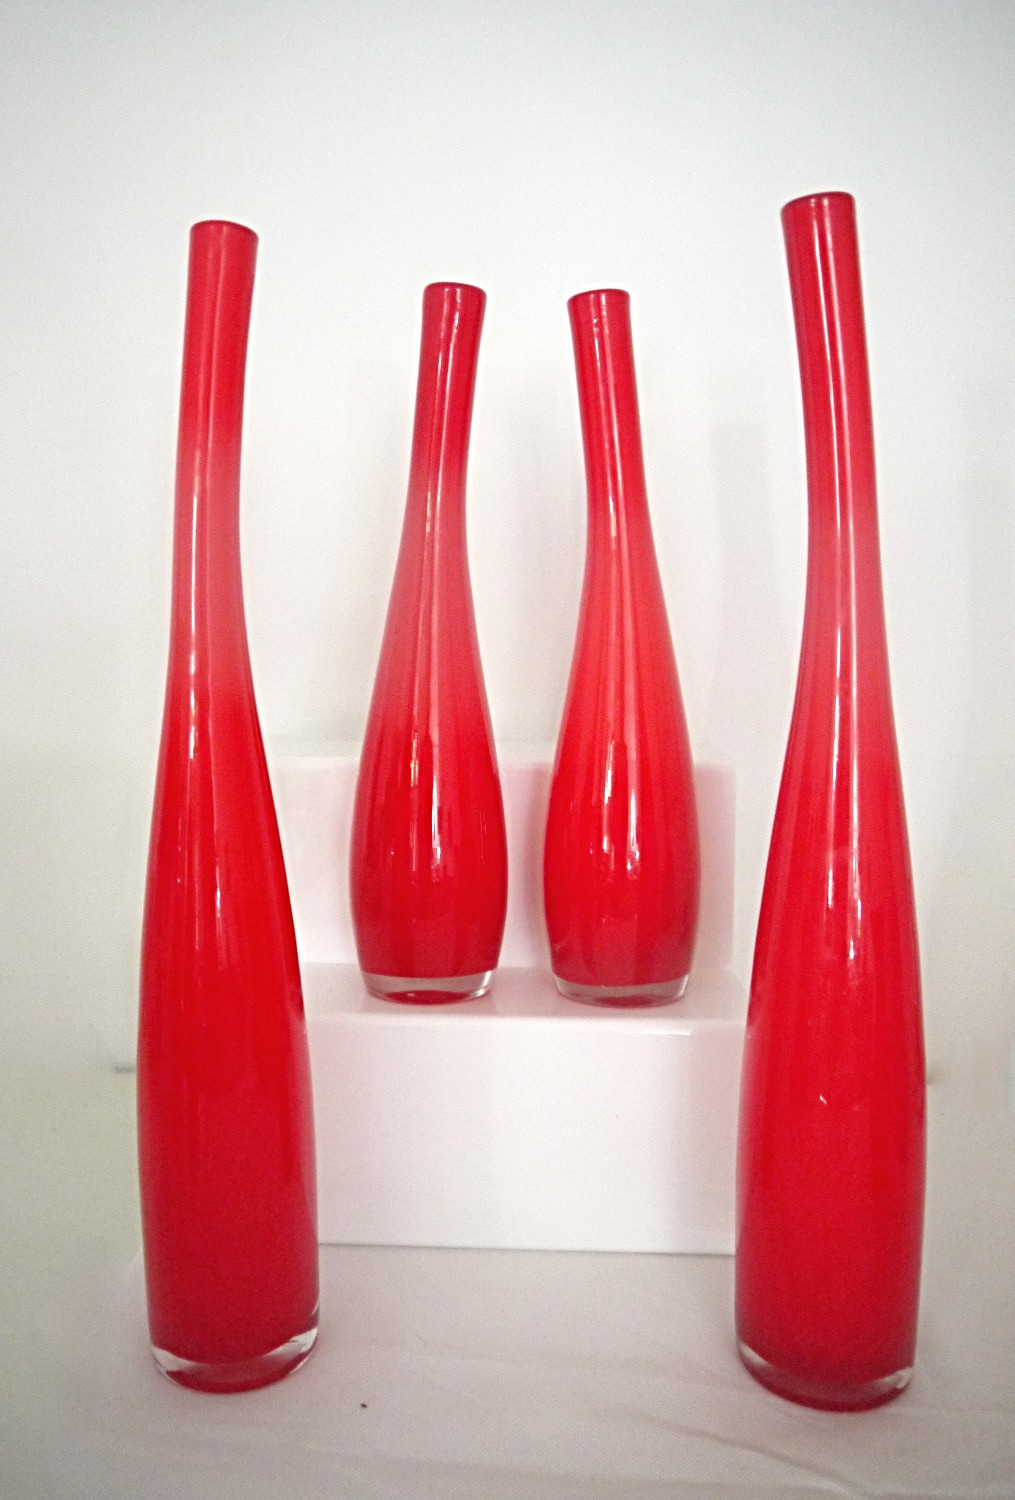 Venetian Glass Vase Of Beeblostyle Com Throughout Set Of Four Modernist Cased Glass Vases Sculptures